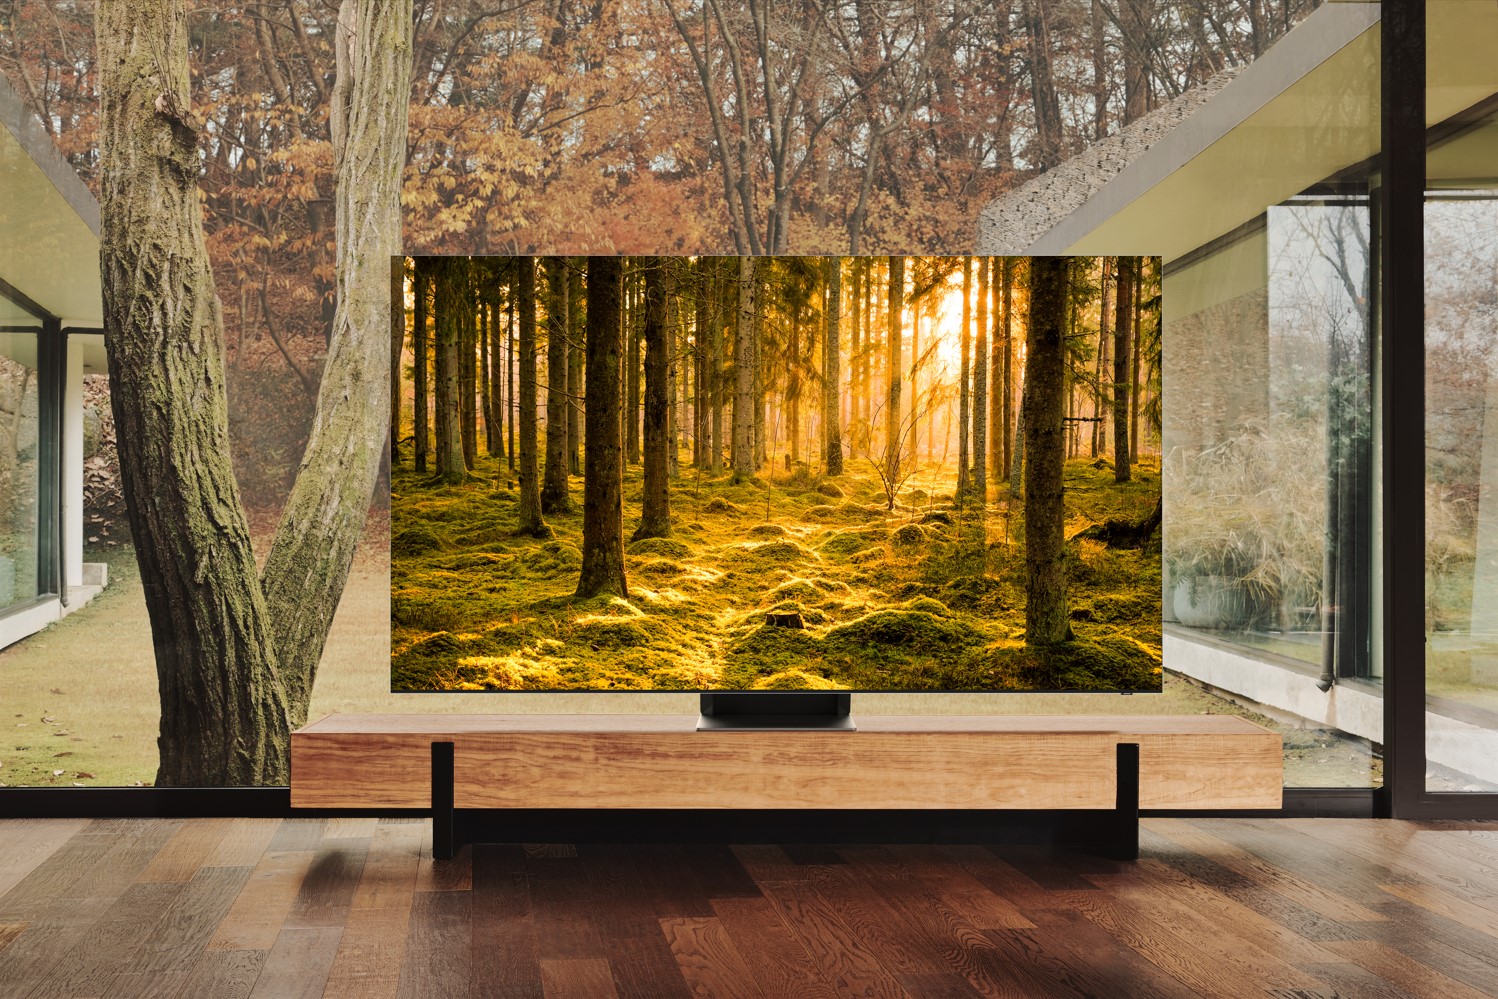 Samsung Canada launched the 2022 QLED Neo 8K TV, bringing breakthrough innovations for a premium viewing experience

